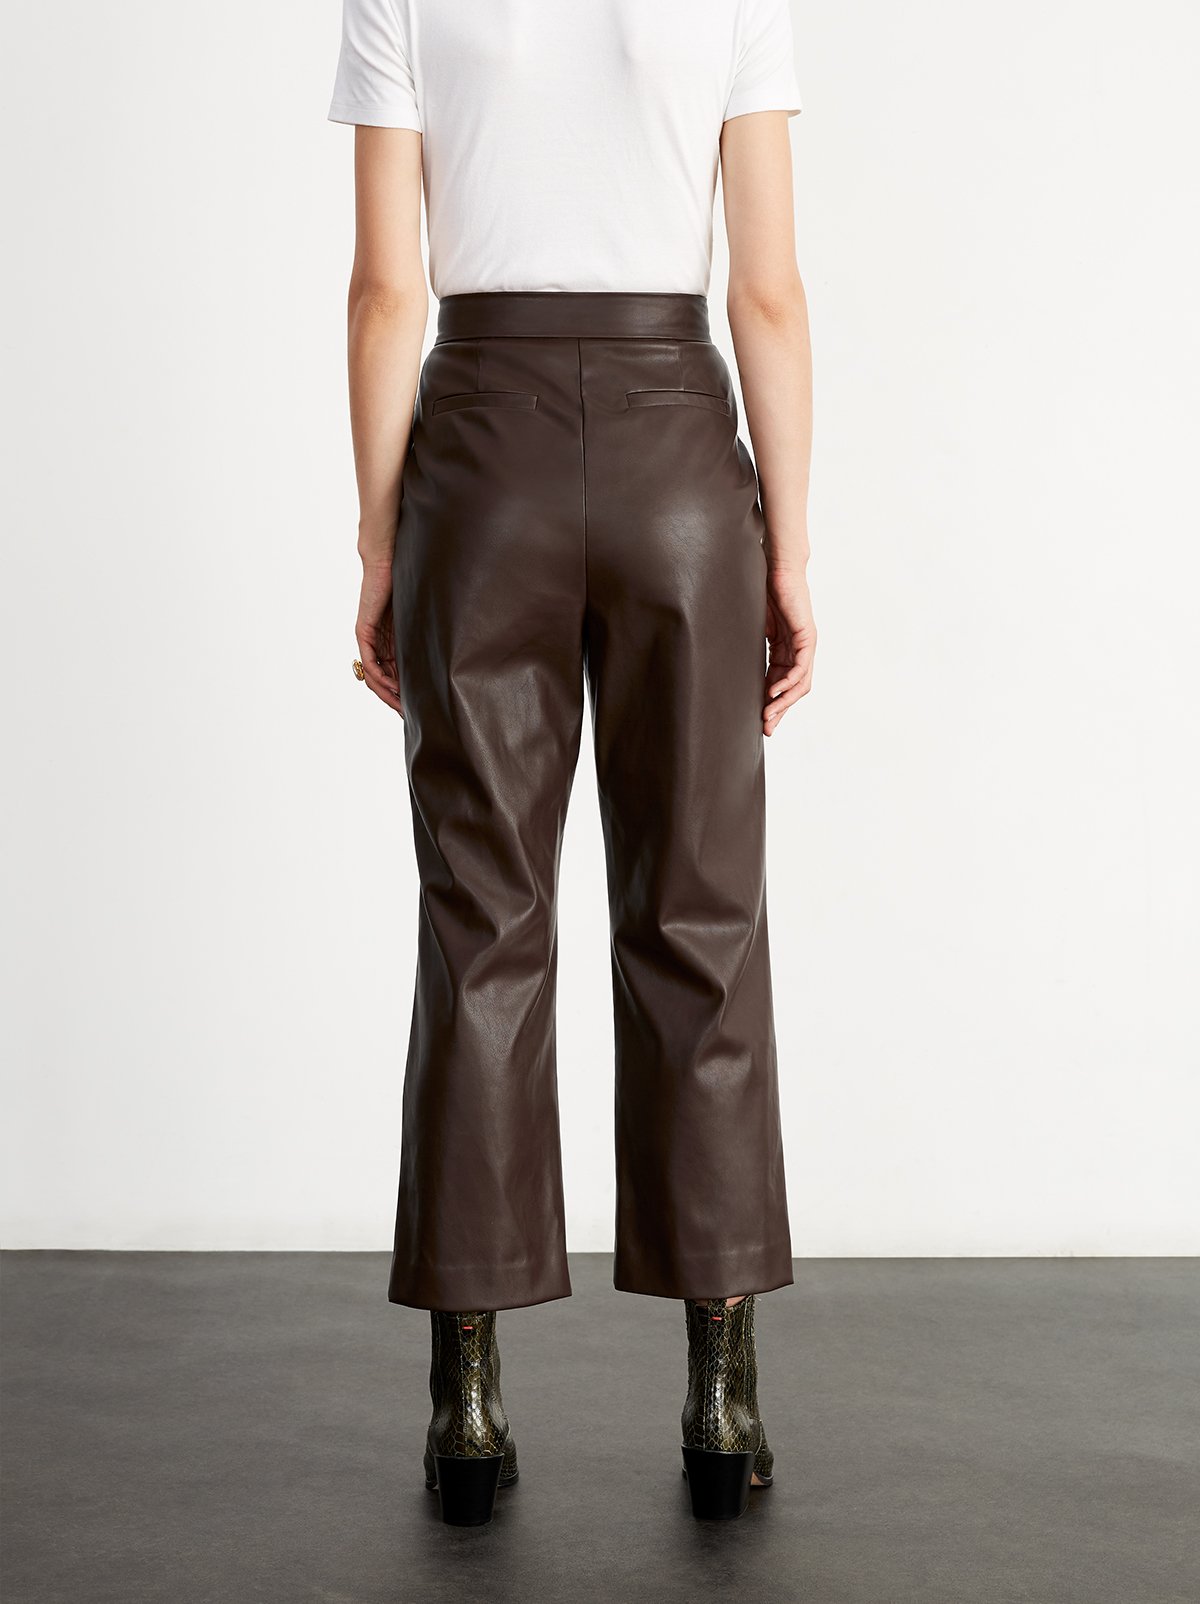 brown faux leather pants